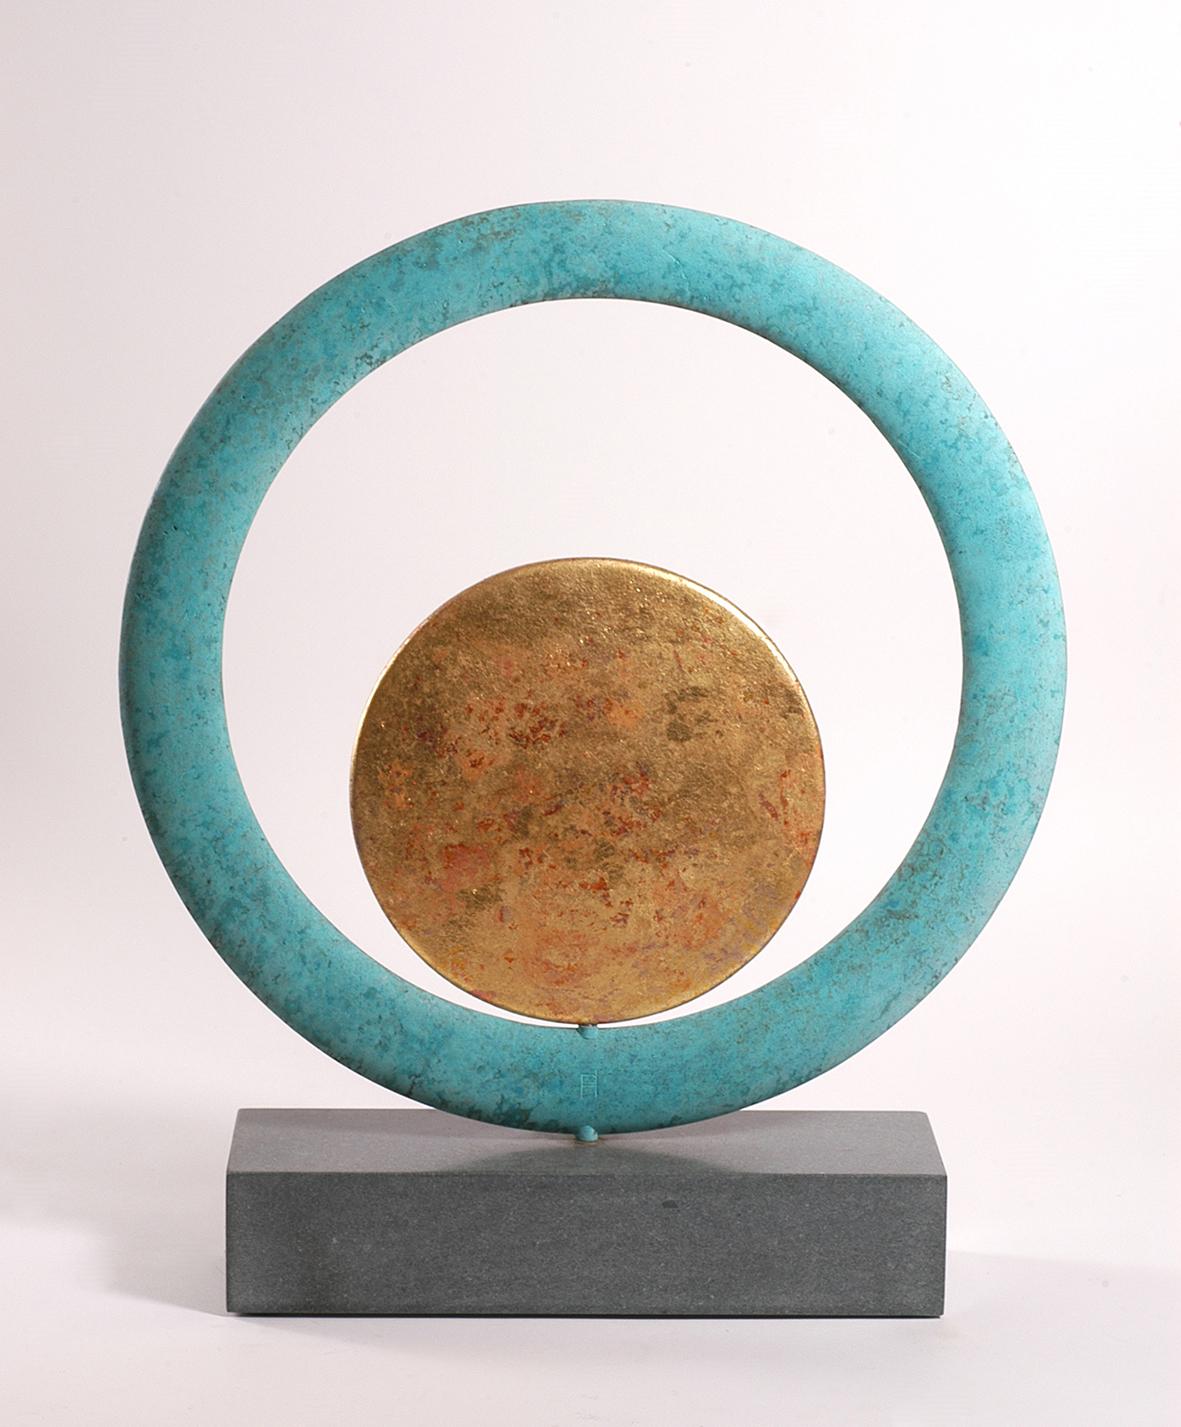 2 parts bronze independently rotating on a Cumbrian slate base
Series of one-off variations 
Stamped with monogram signature and uniquely numbered 391F
The outer ring is solid bronze with an oxidised finish and is the common element in the series of